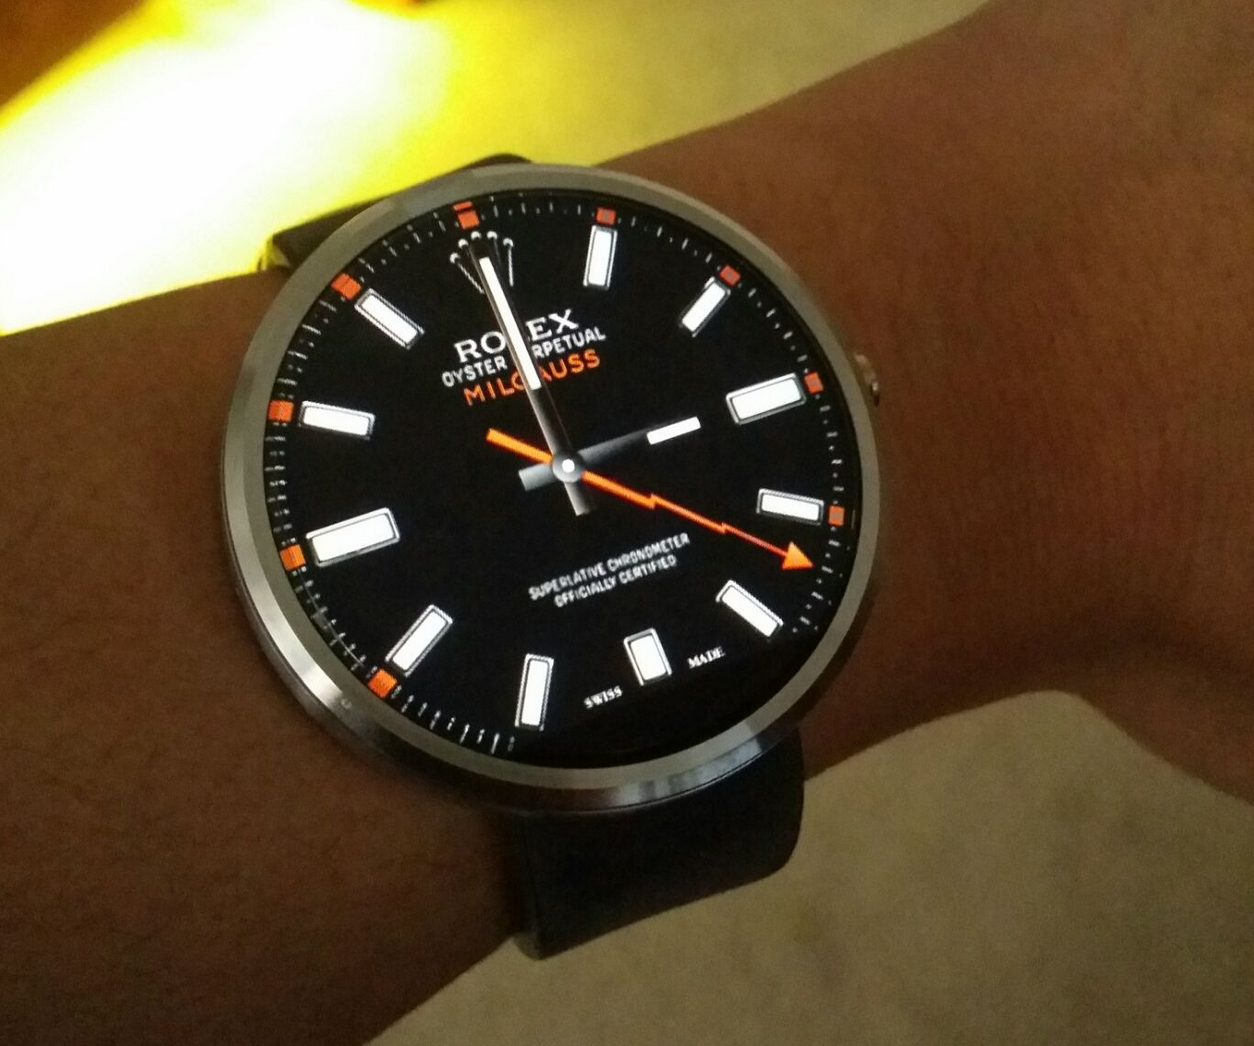 omega android wear watch face